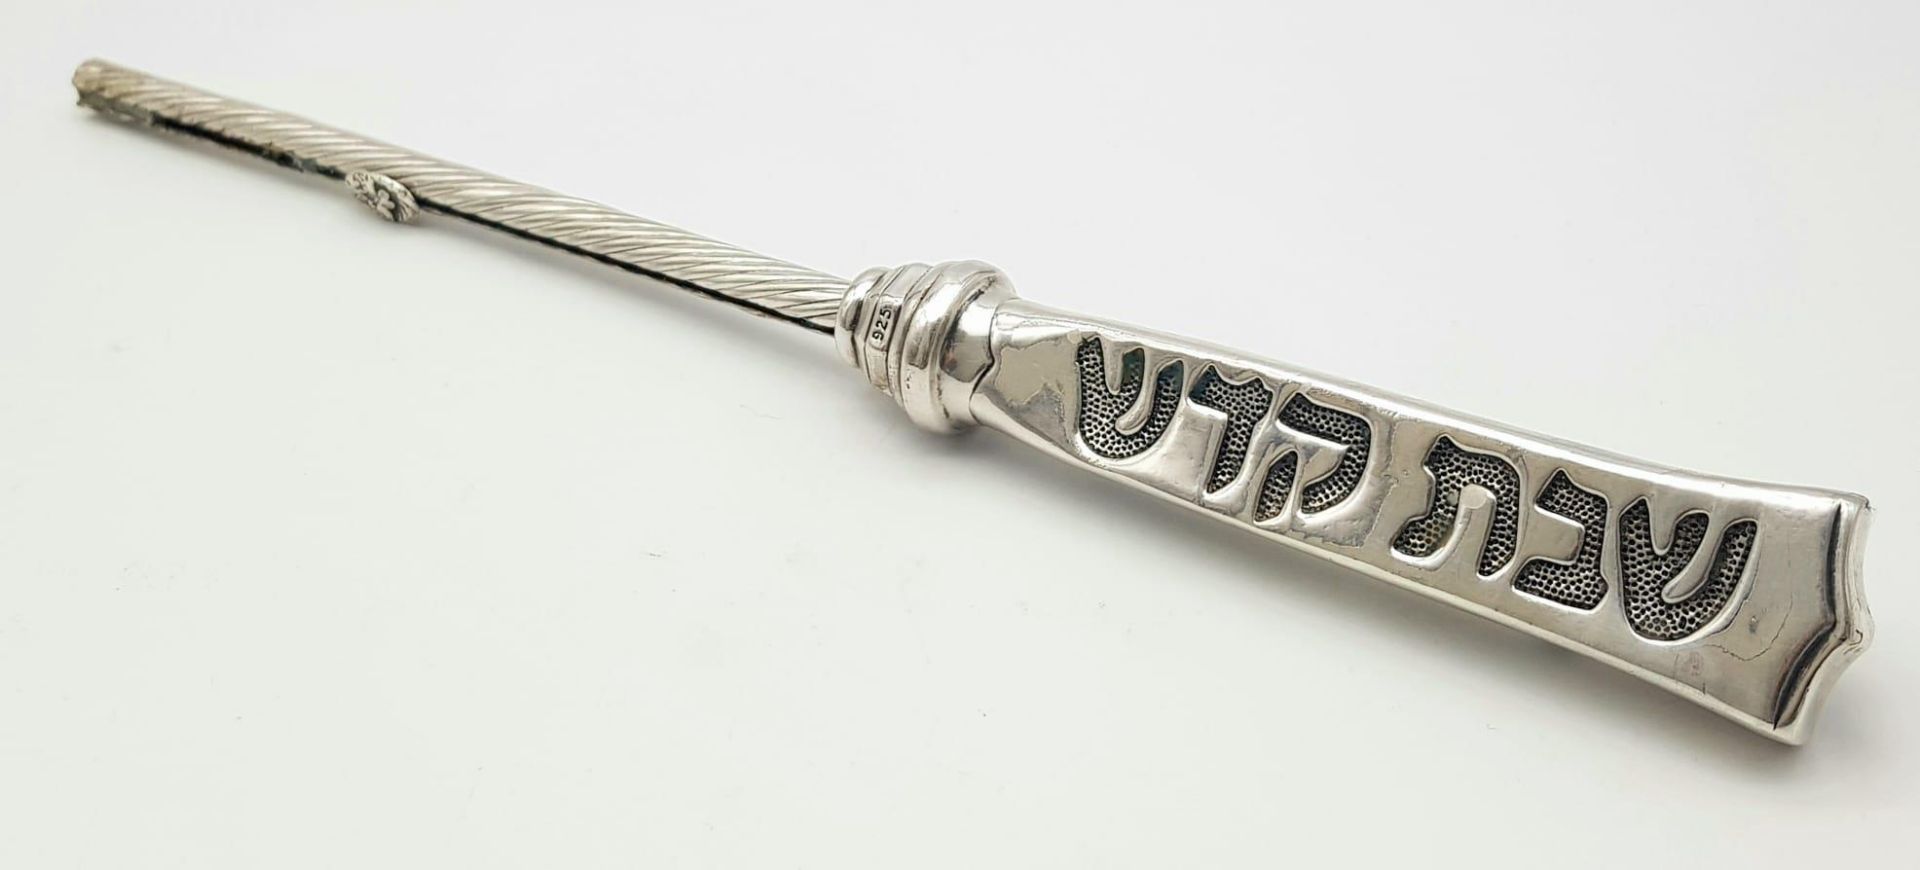 A SILVER SHABAT CANDLE IGNITER . 92gms 31cms IN LENGTH .